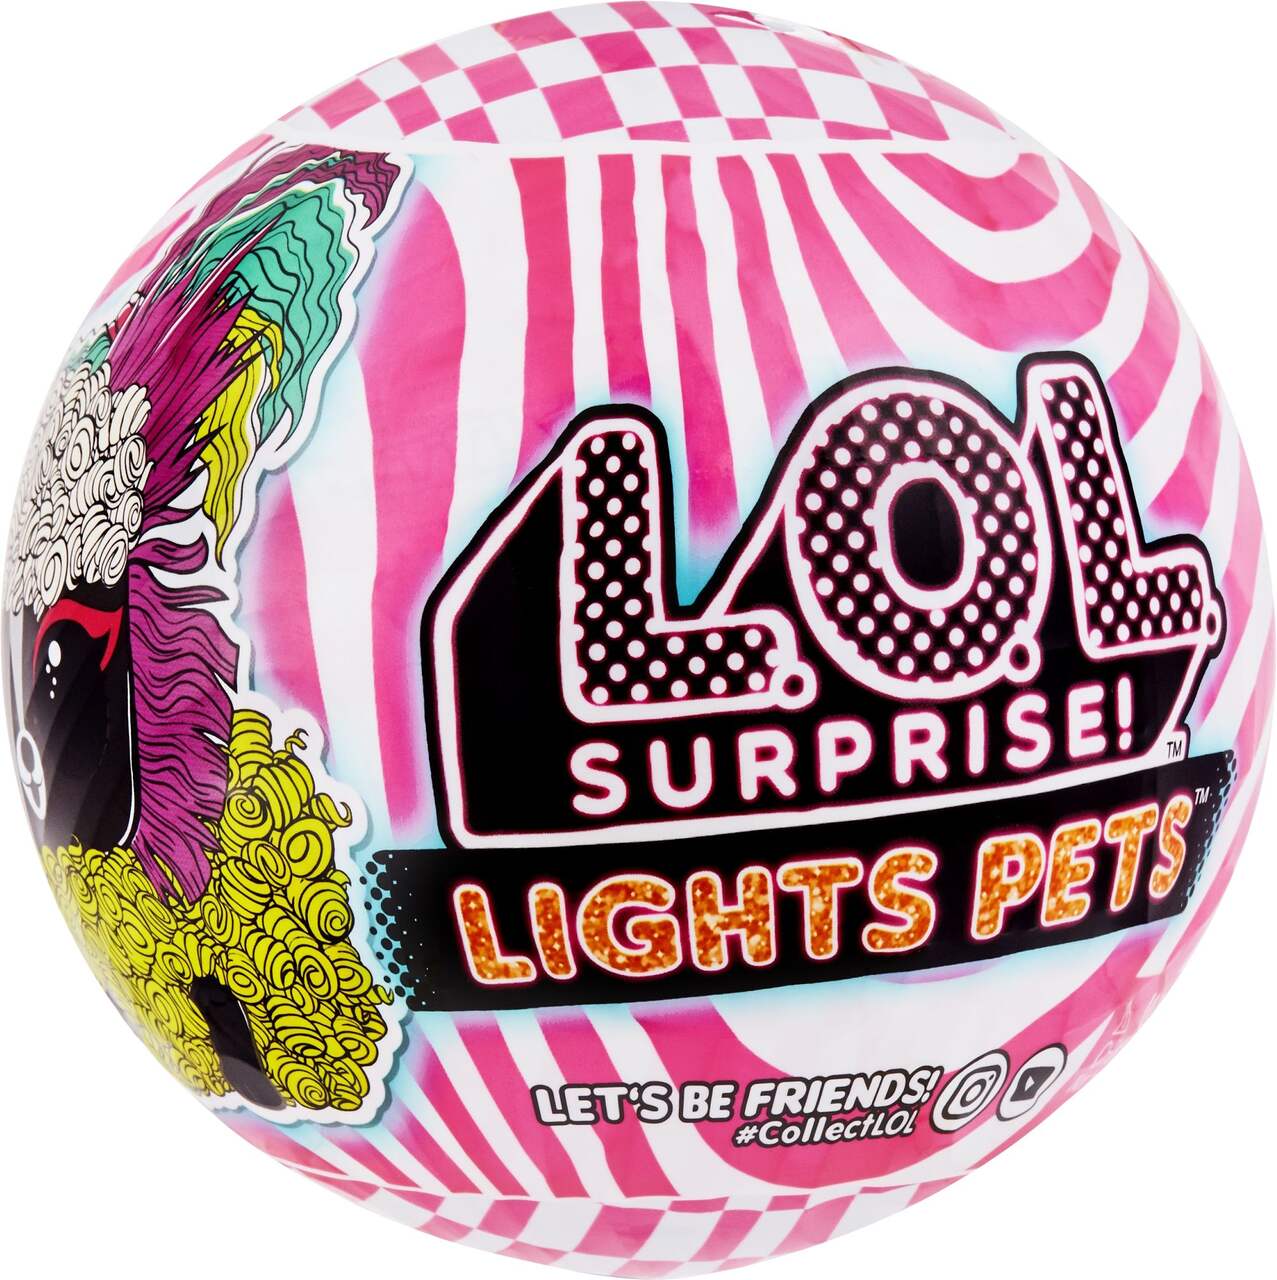 L.O.L. Surprise Glitter Colour Change Collectible Fashion Doll with 7  Surprises, Assorted in PDQ, Ages 4+